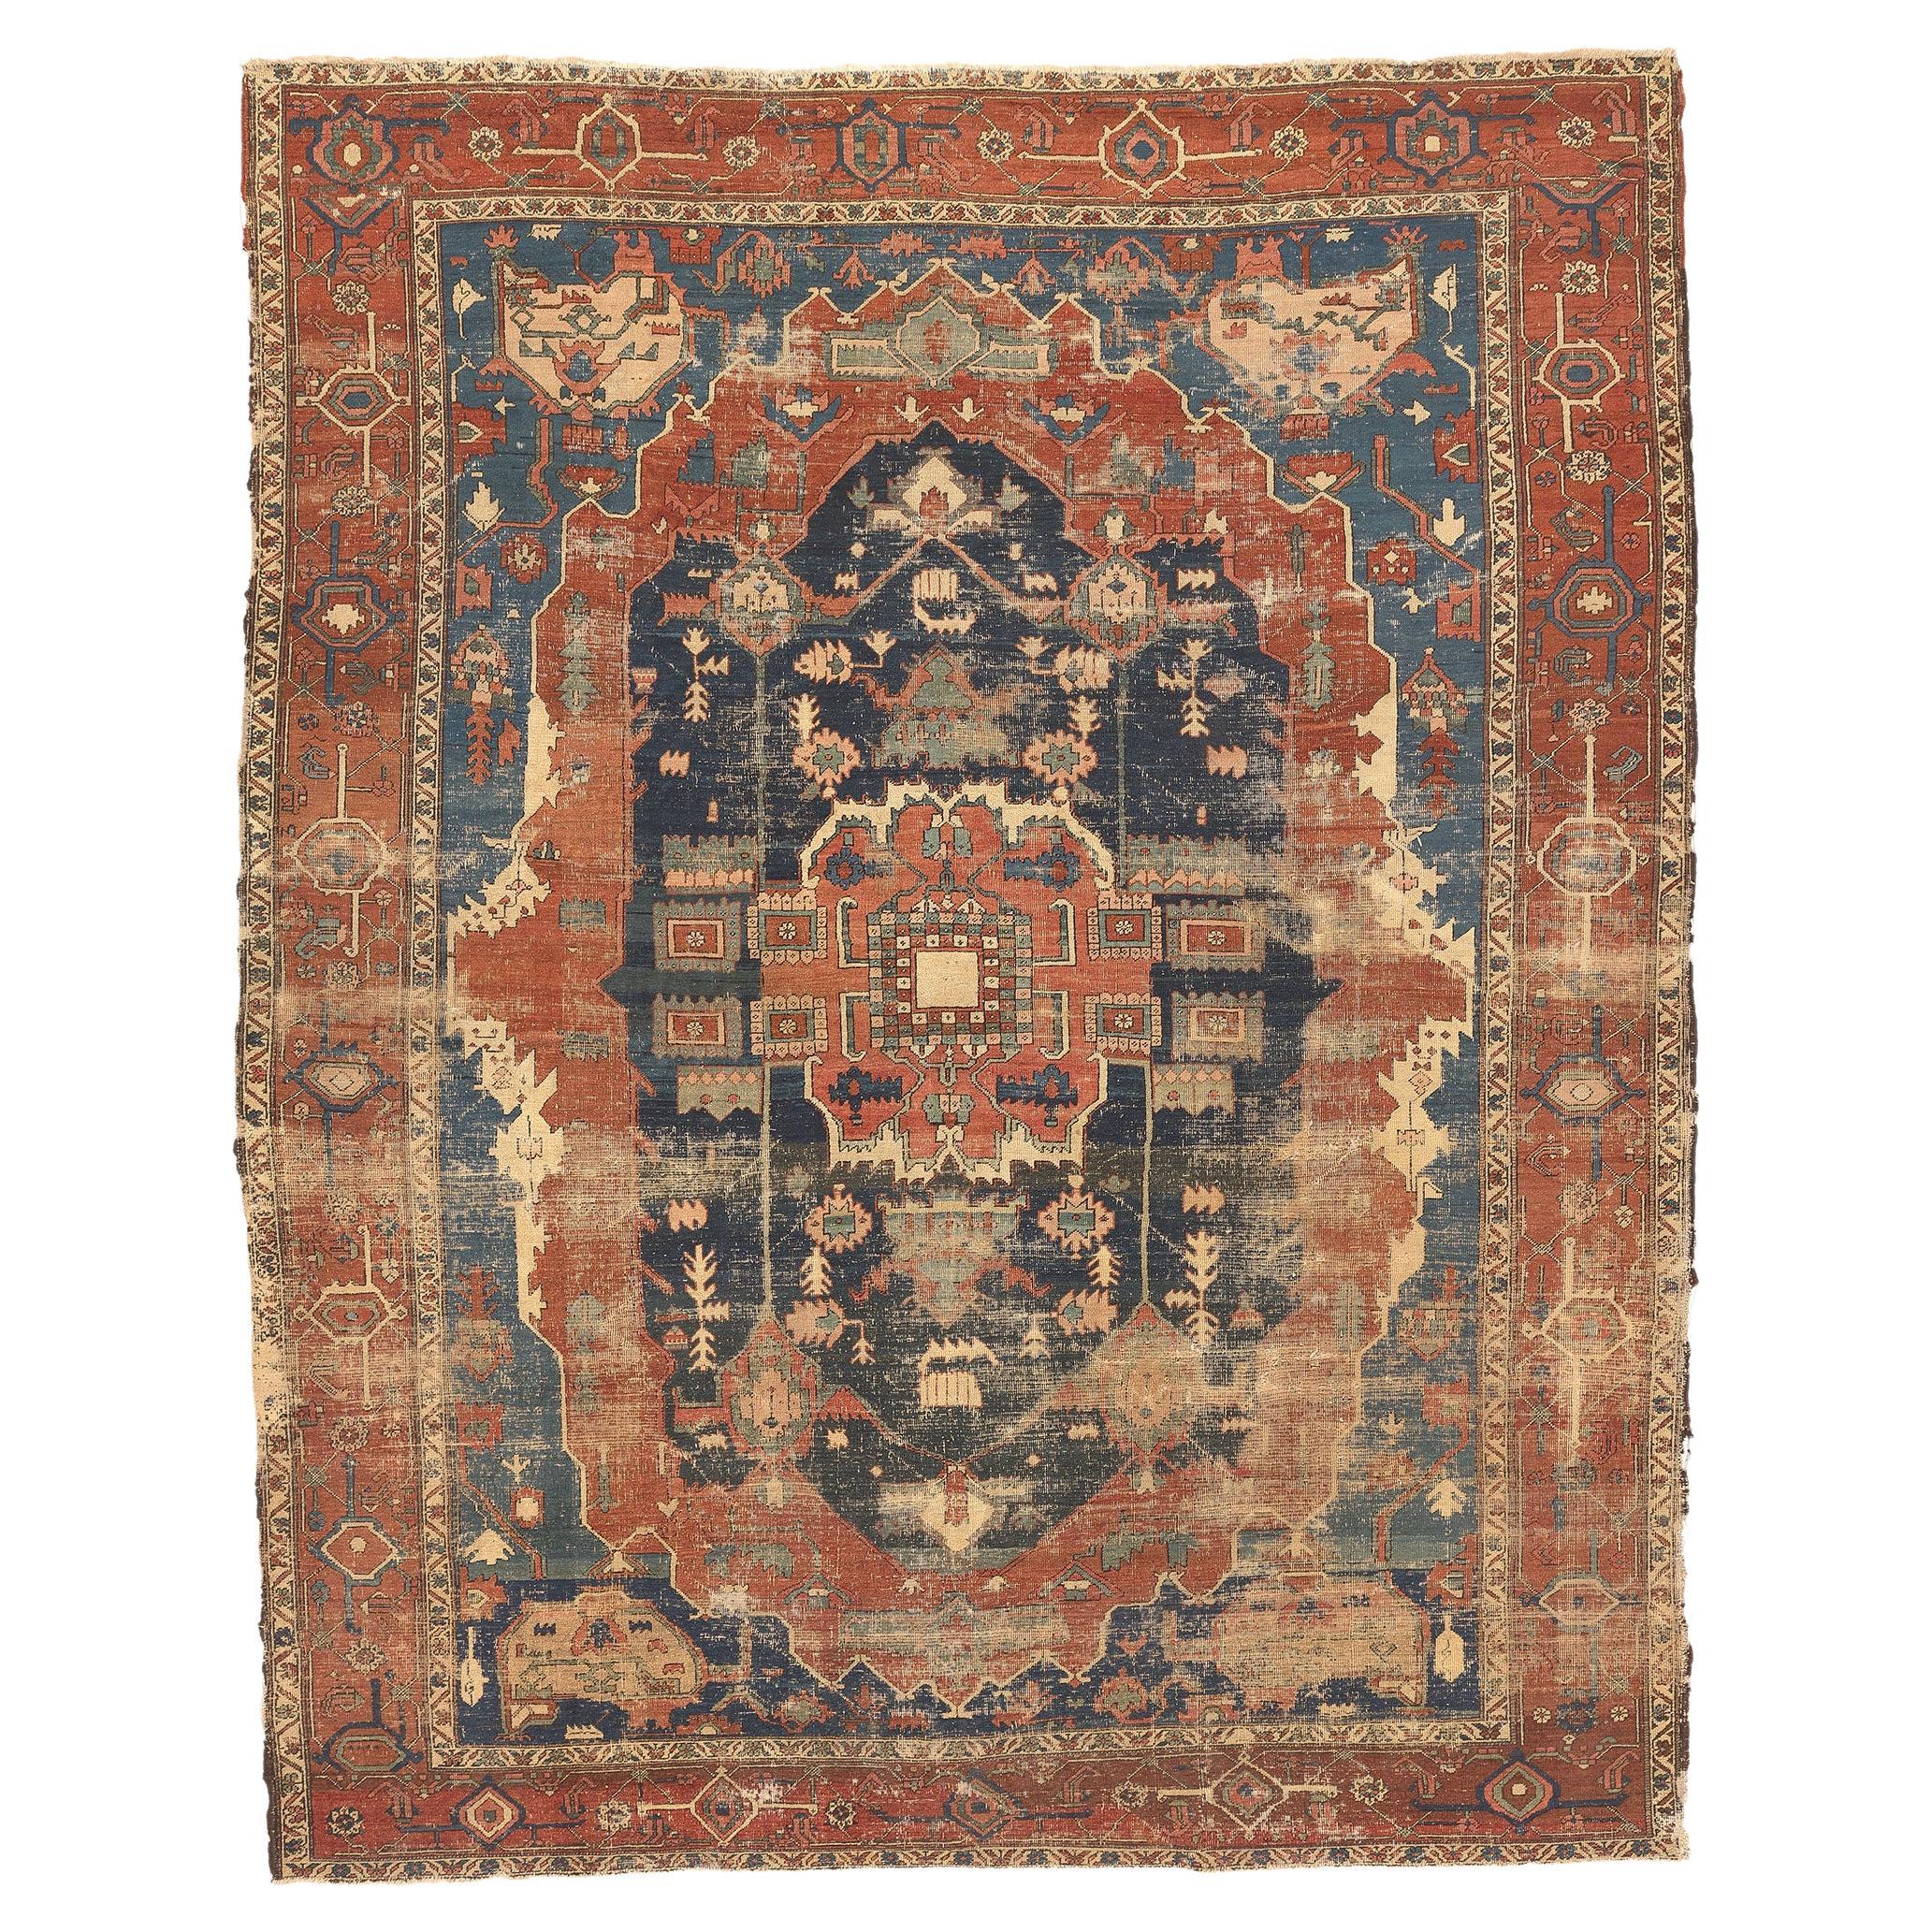 Tapis Persan Serapi Antique Beauty Distressed, Rugged Beauty Meets Weathered Charm (en anglais)